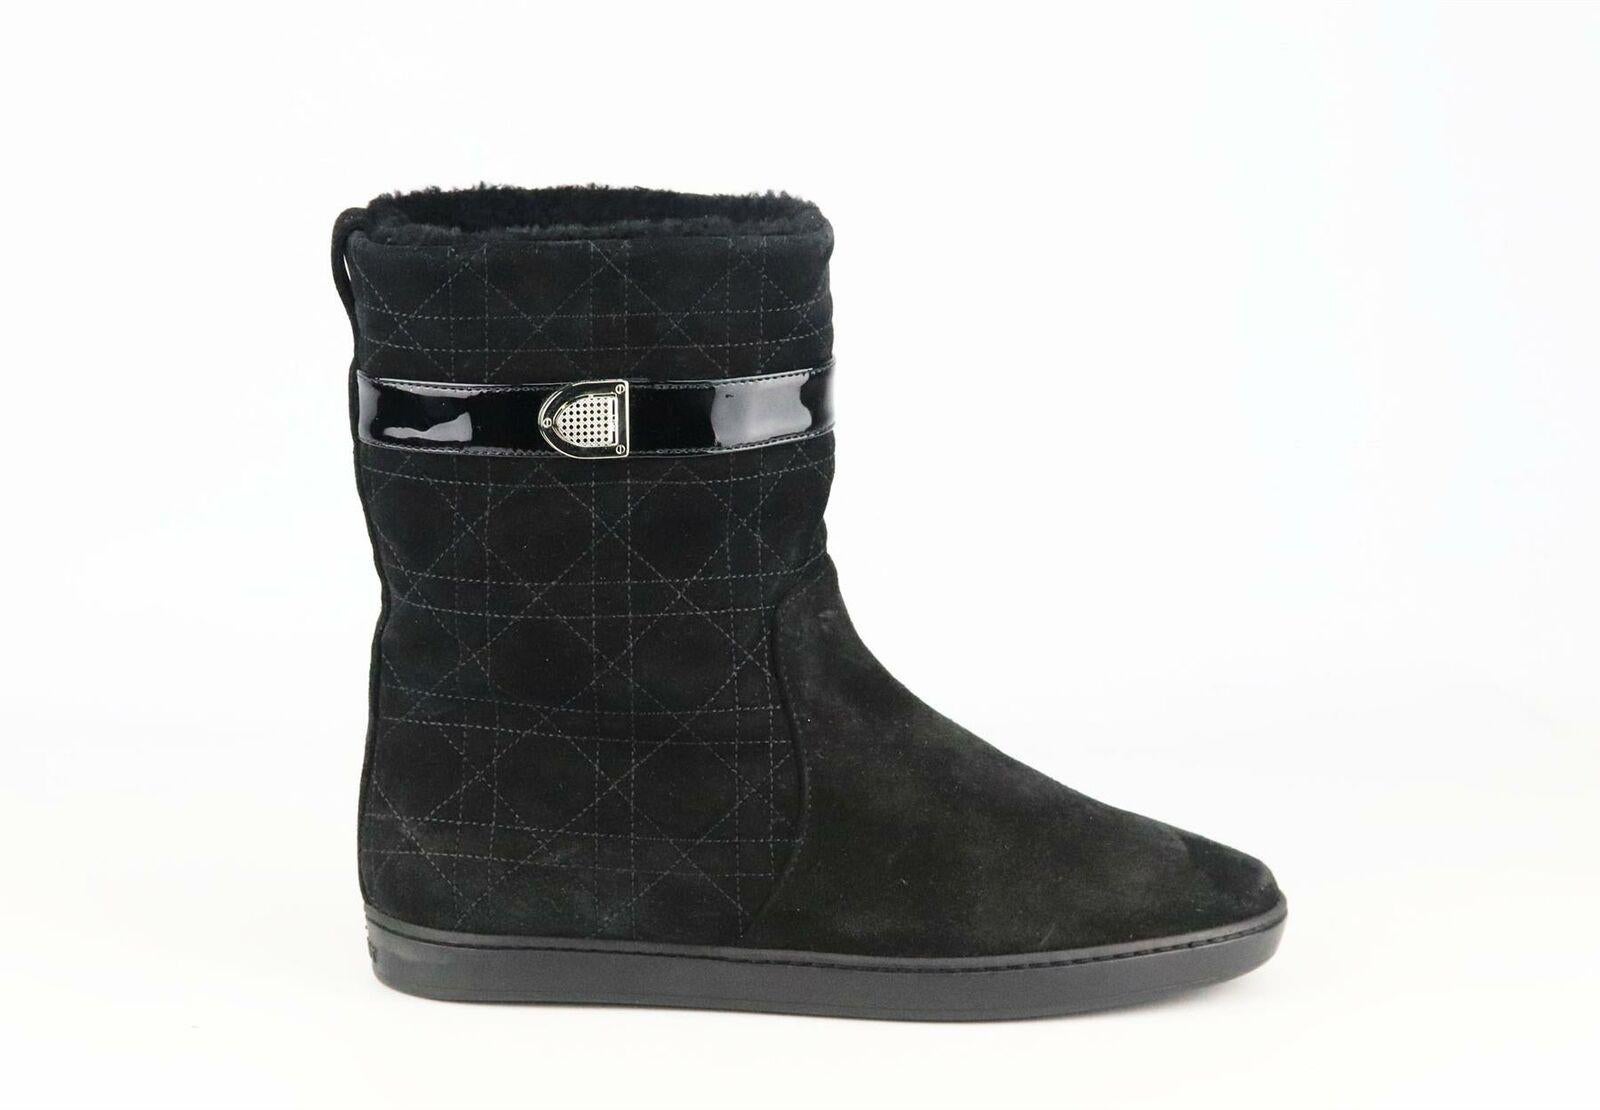 Perfect for wintry days, Christian Dior ankle boots are lined in cozy black shearling, this black ‘cannage’ quilted suede pair rests on a durable quilted rubber sole and is lightly cushioned for added comfort.
Heel measures approximately 75mm/ 1